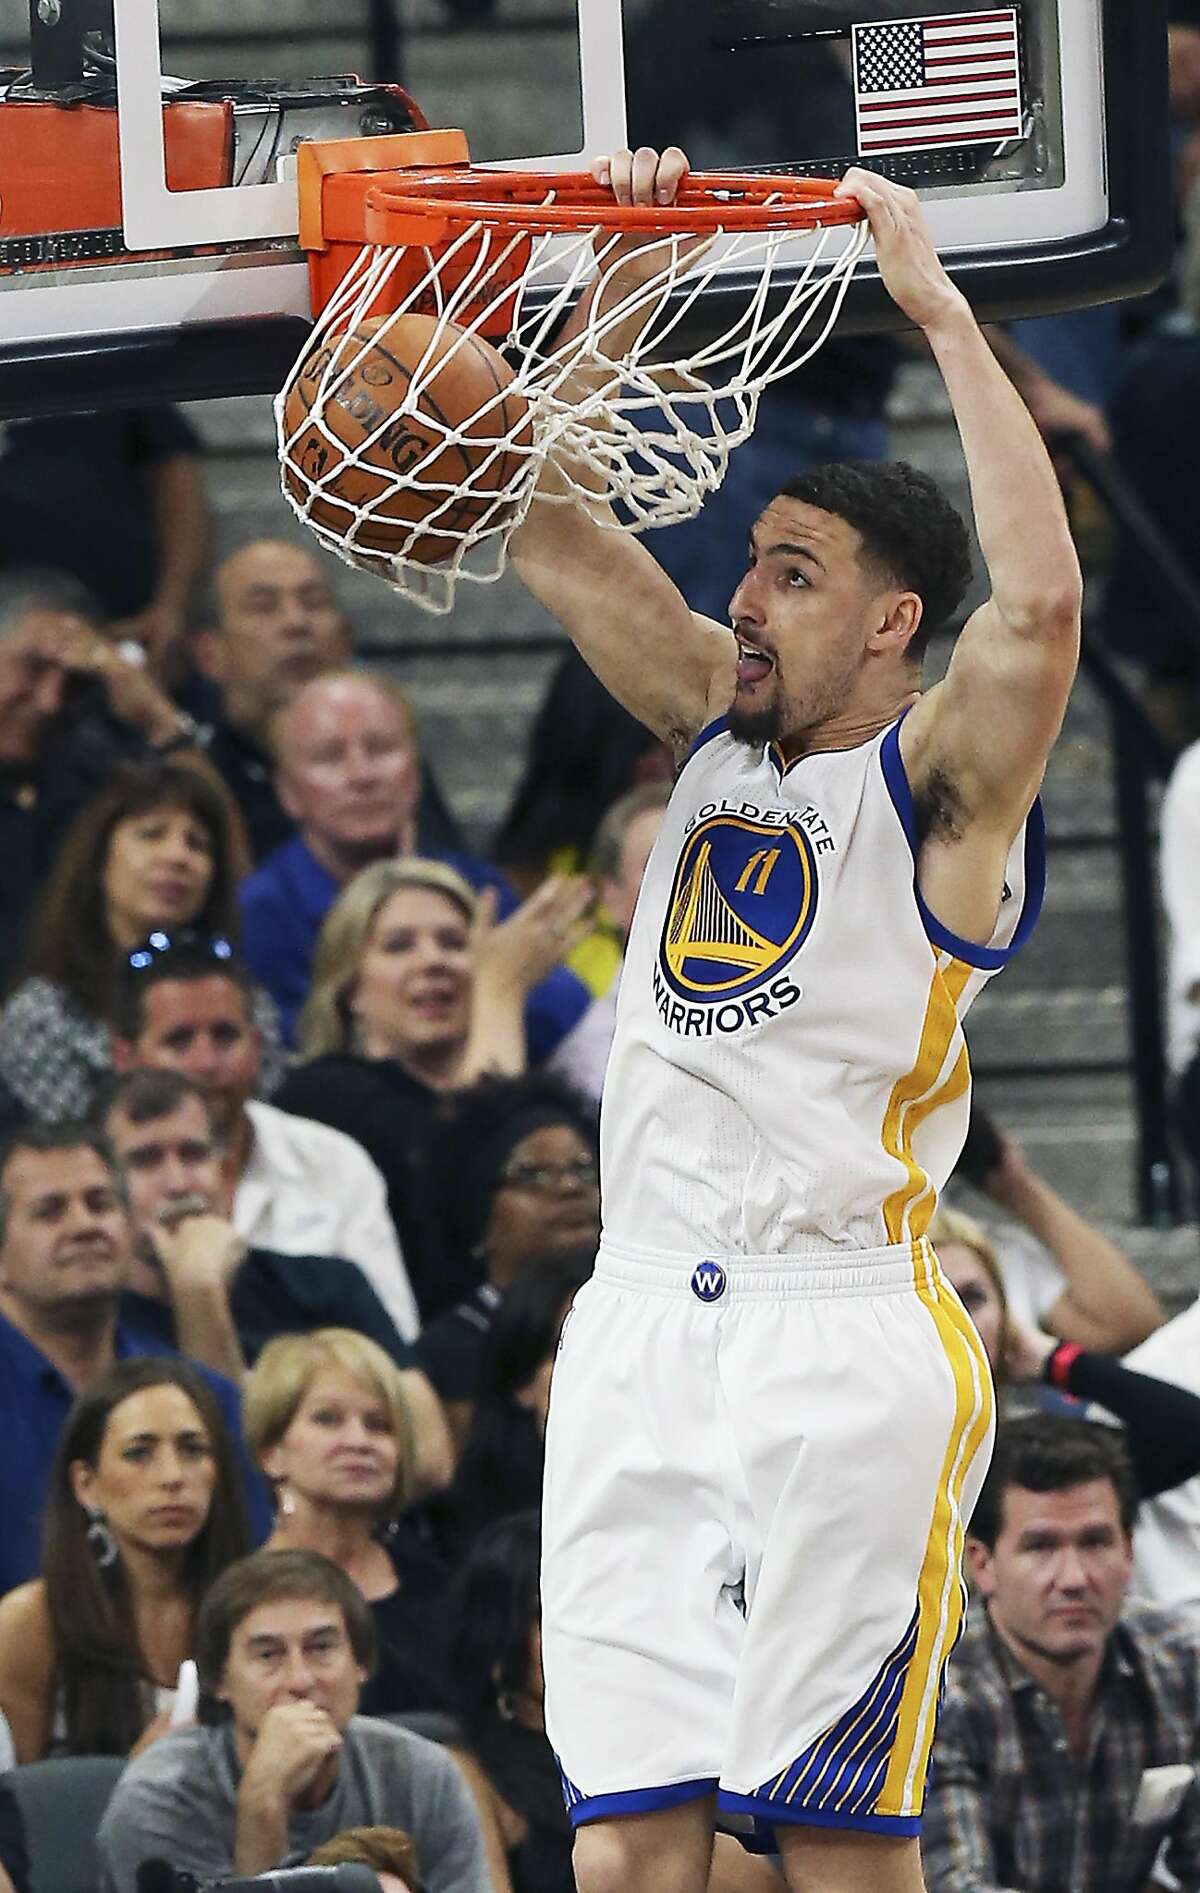 Klay Thompson gets a jam after breaking free as the Spurs host Golden State at the AT&T Center on April 10, 2016.